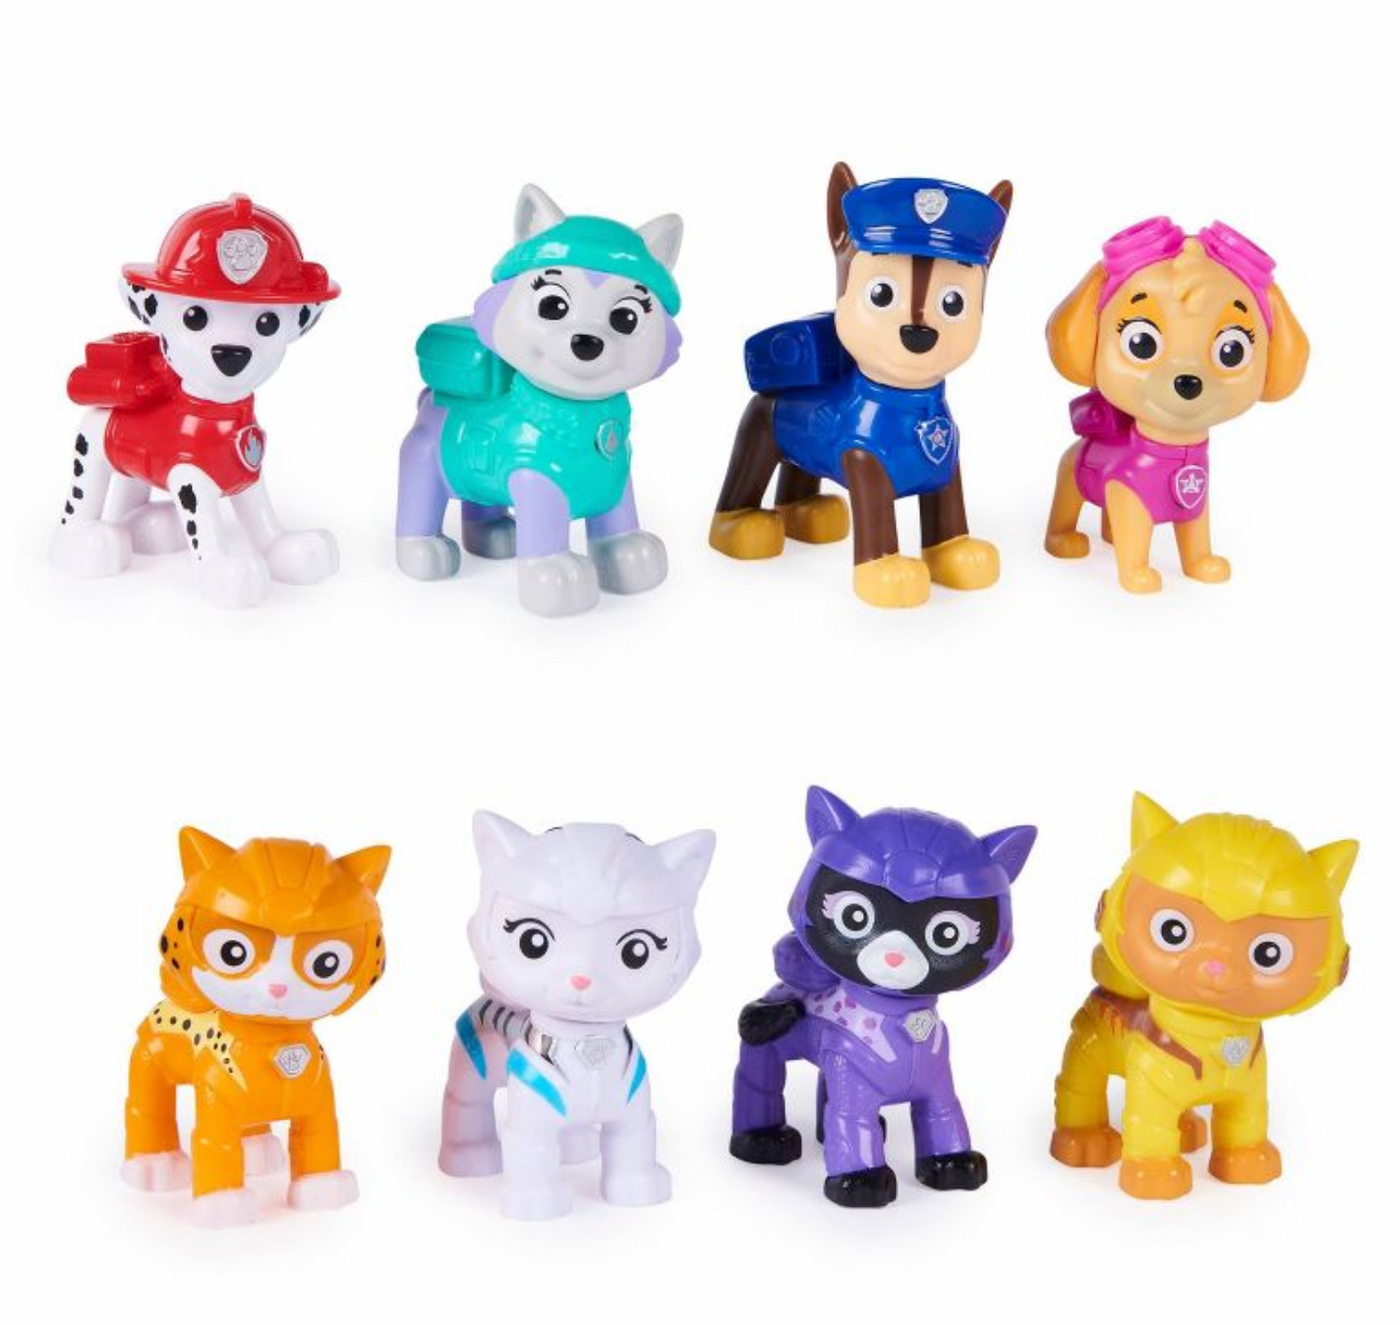 Paw Patrol and Cat Pack Figure Gift Set Target Exclusive New with Box